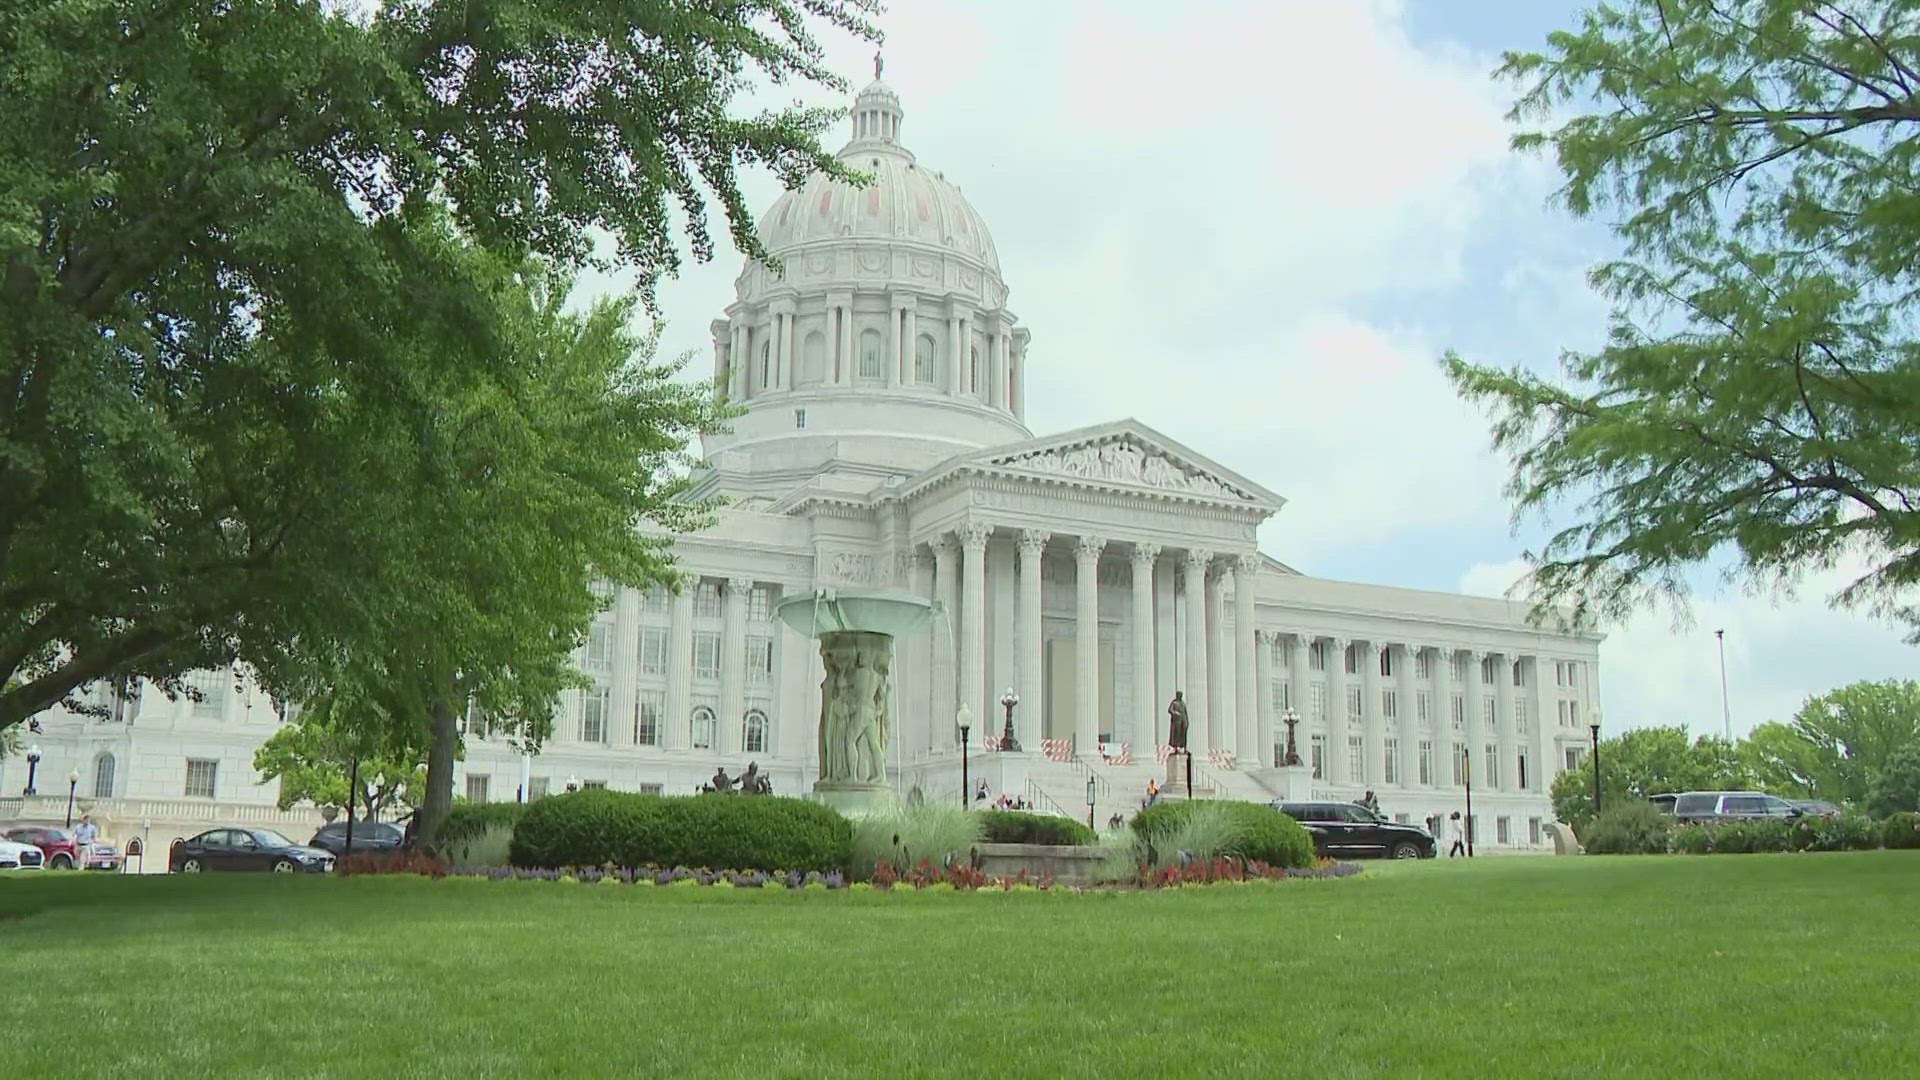 Missouri lawmakers left Jefferson City last week without expanding early childhood education funding, something Governor Parson called on them to do.